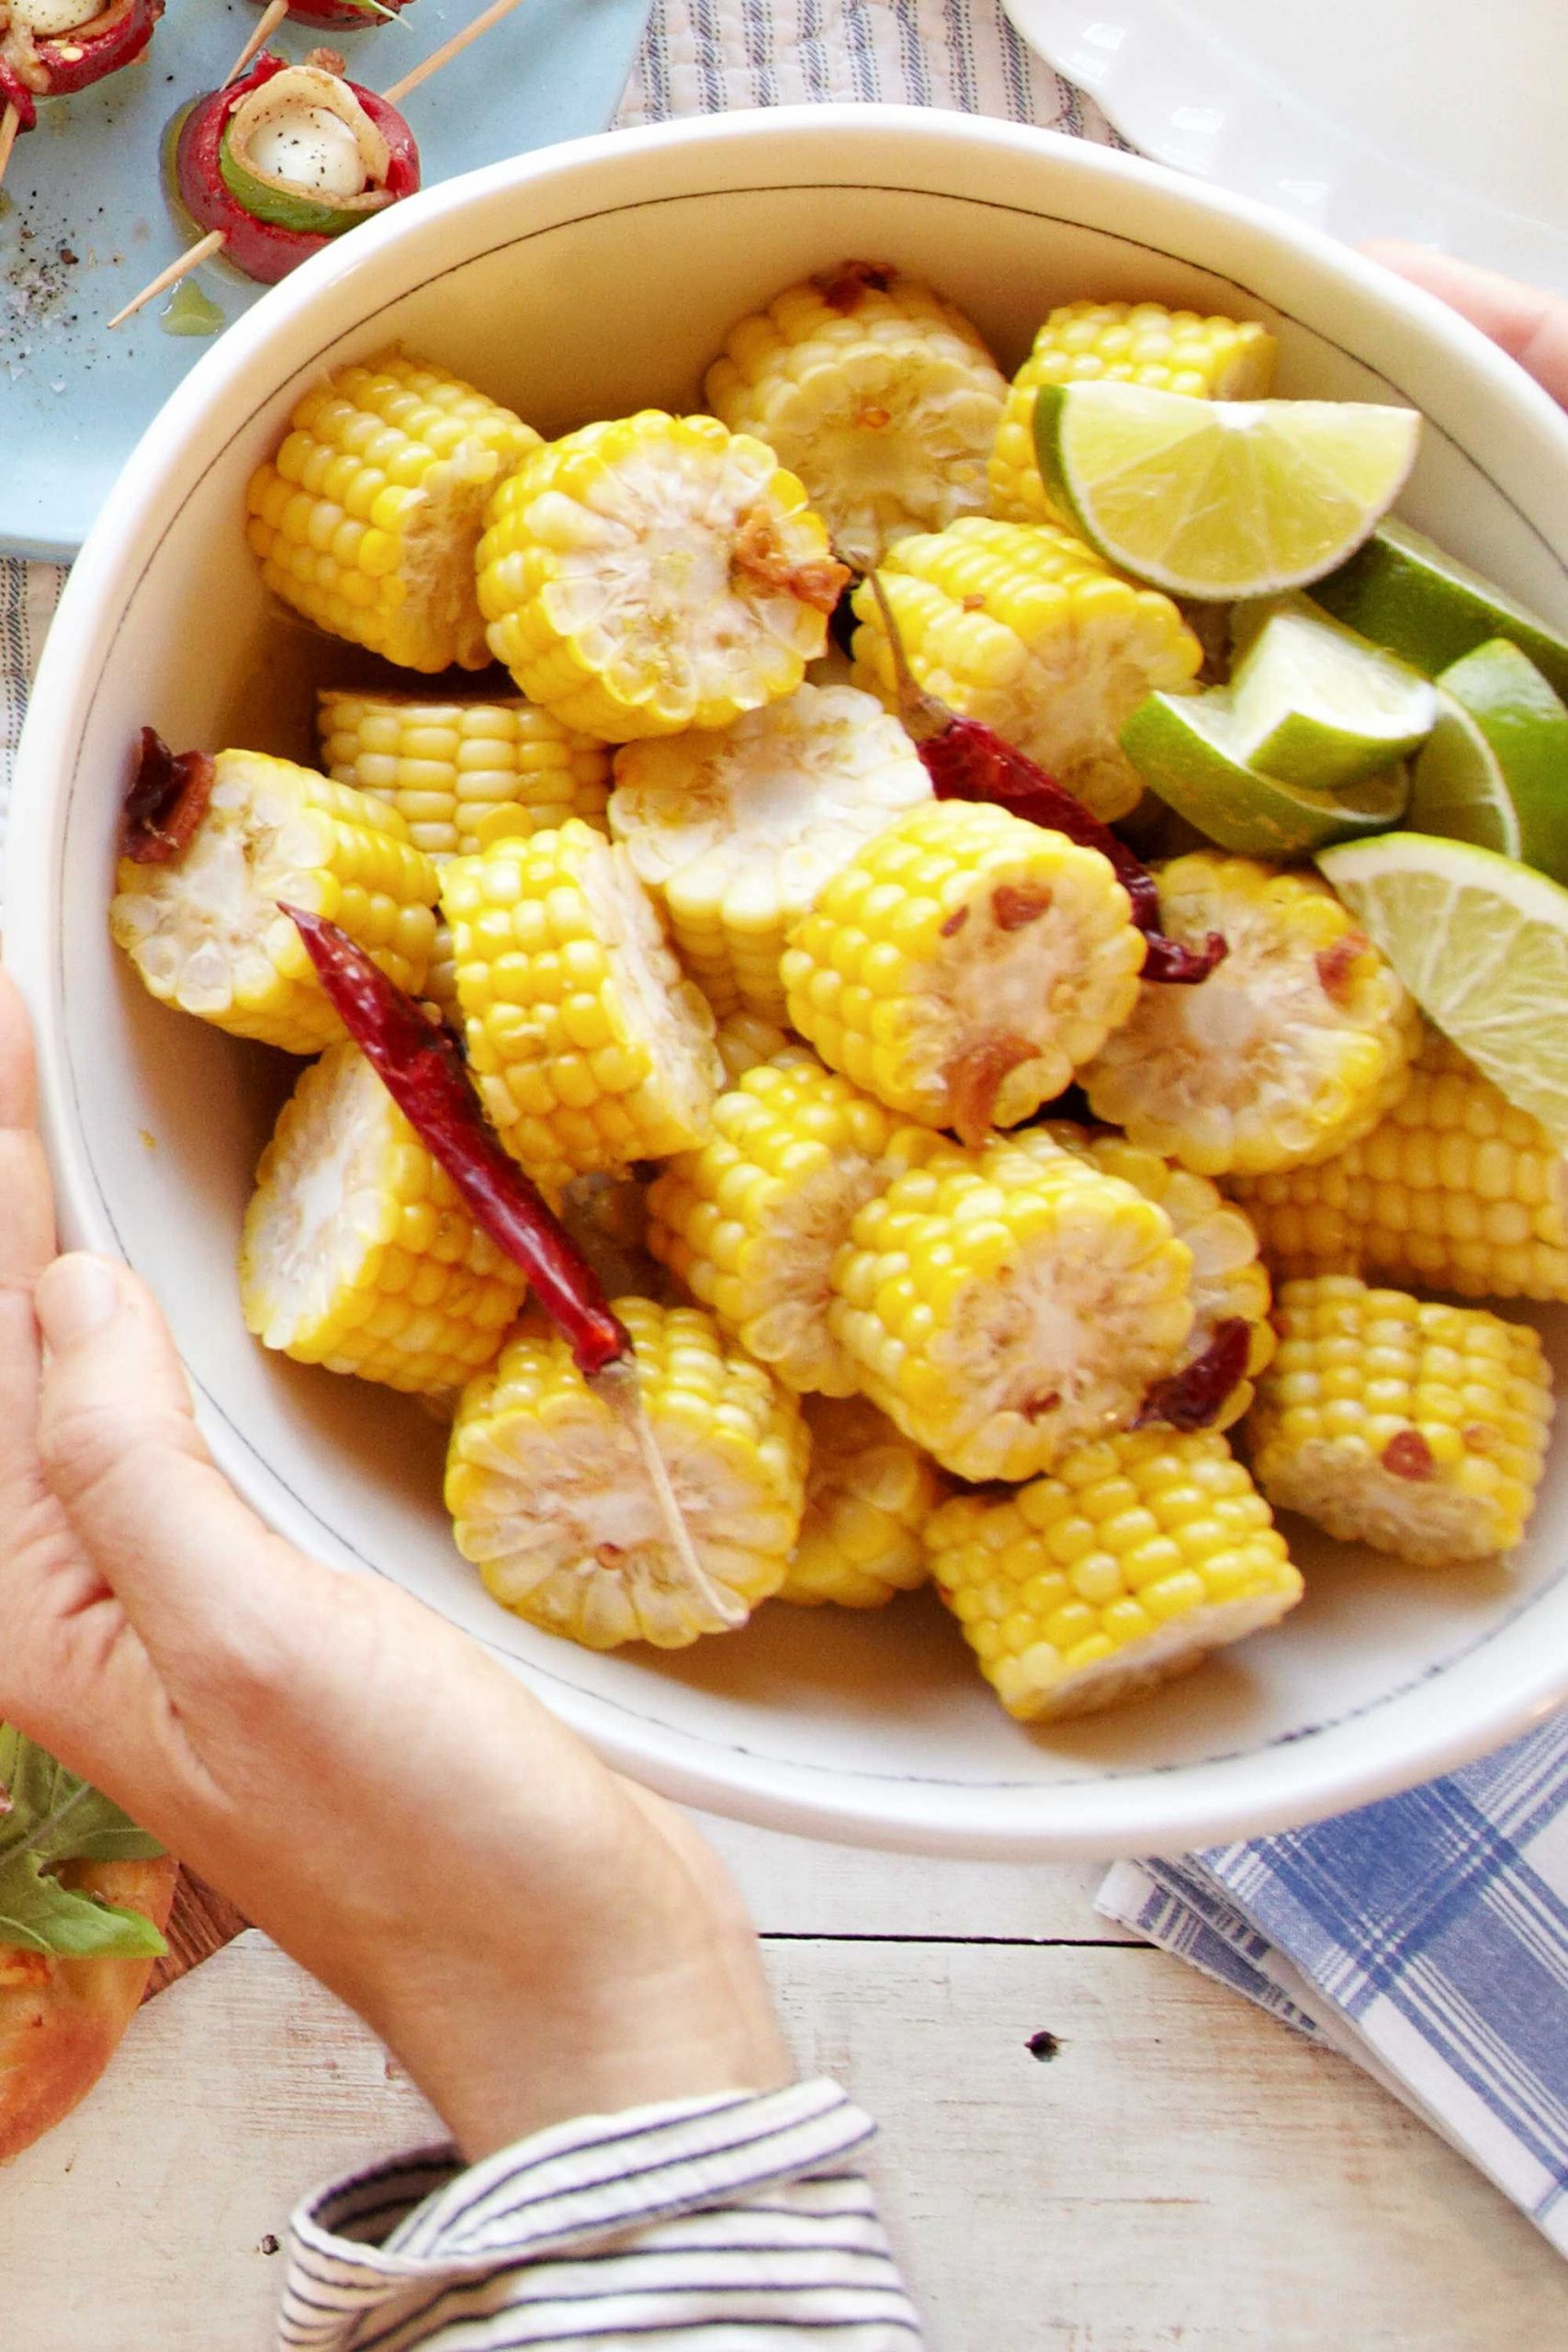 Picnic Side Dishes Ideas
 Seasonal Picnic Recipes From Lobster Rolls to Strawberry